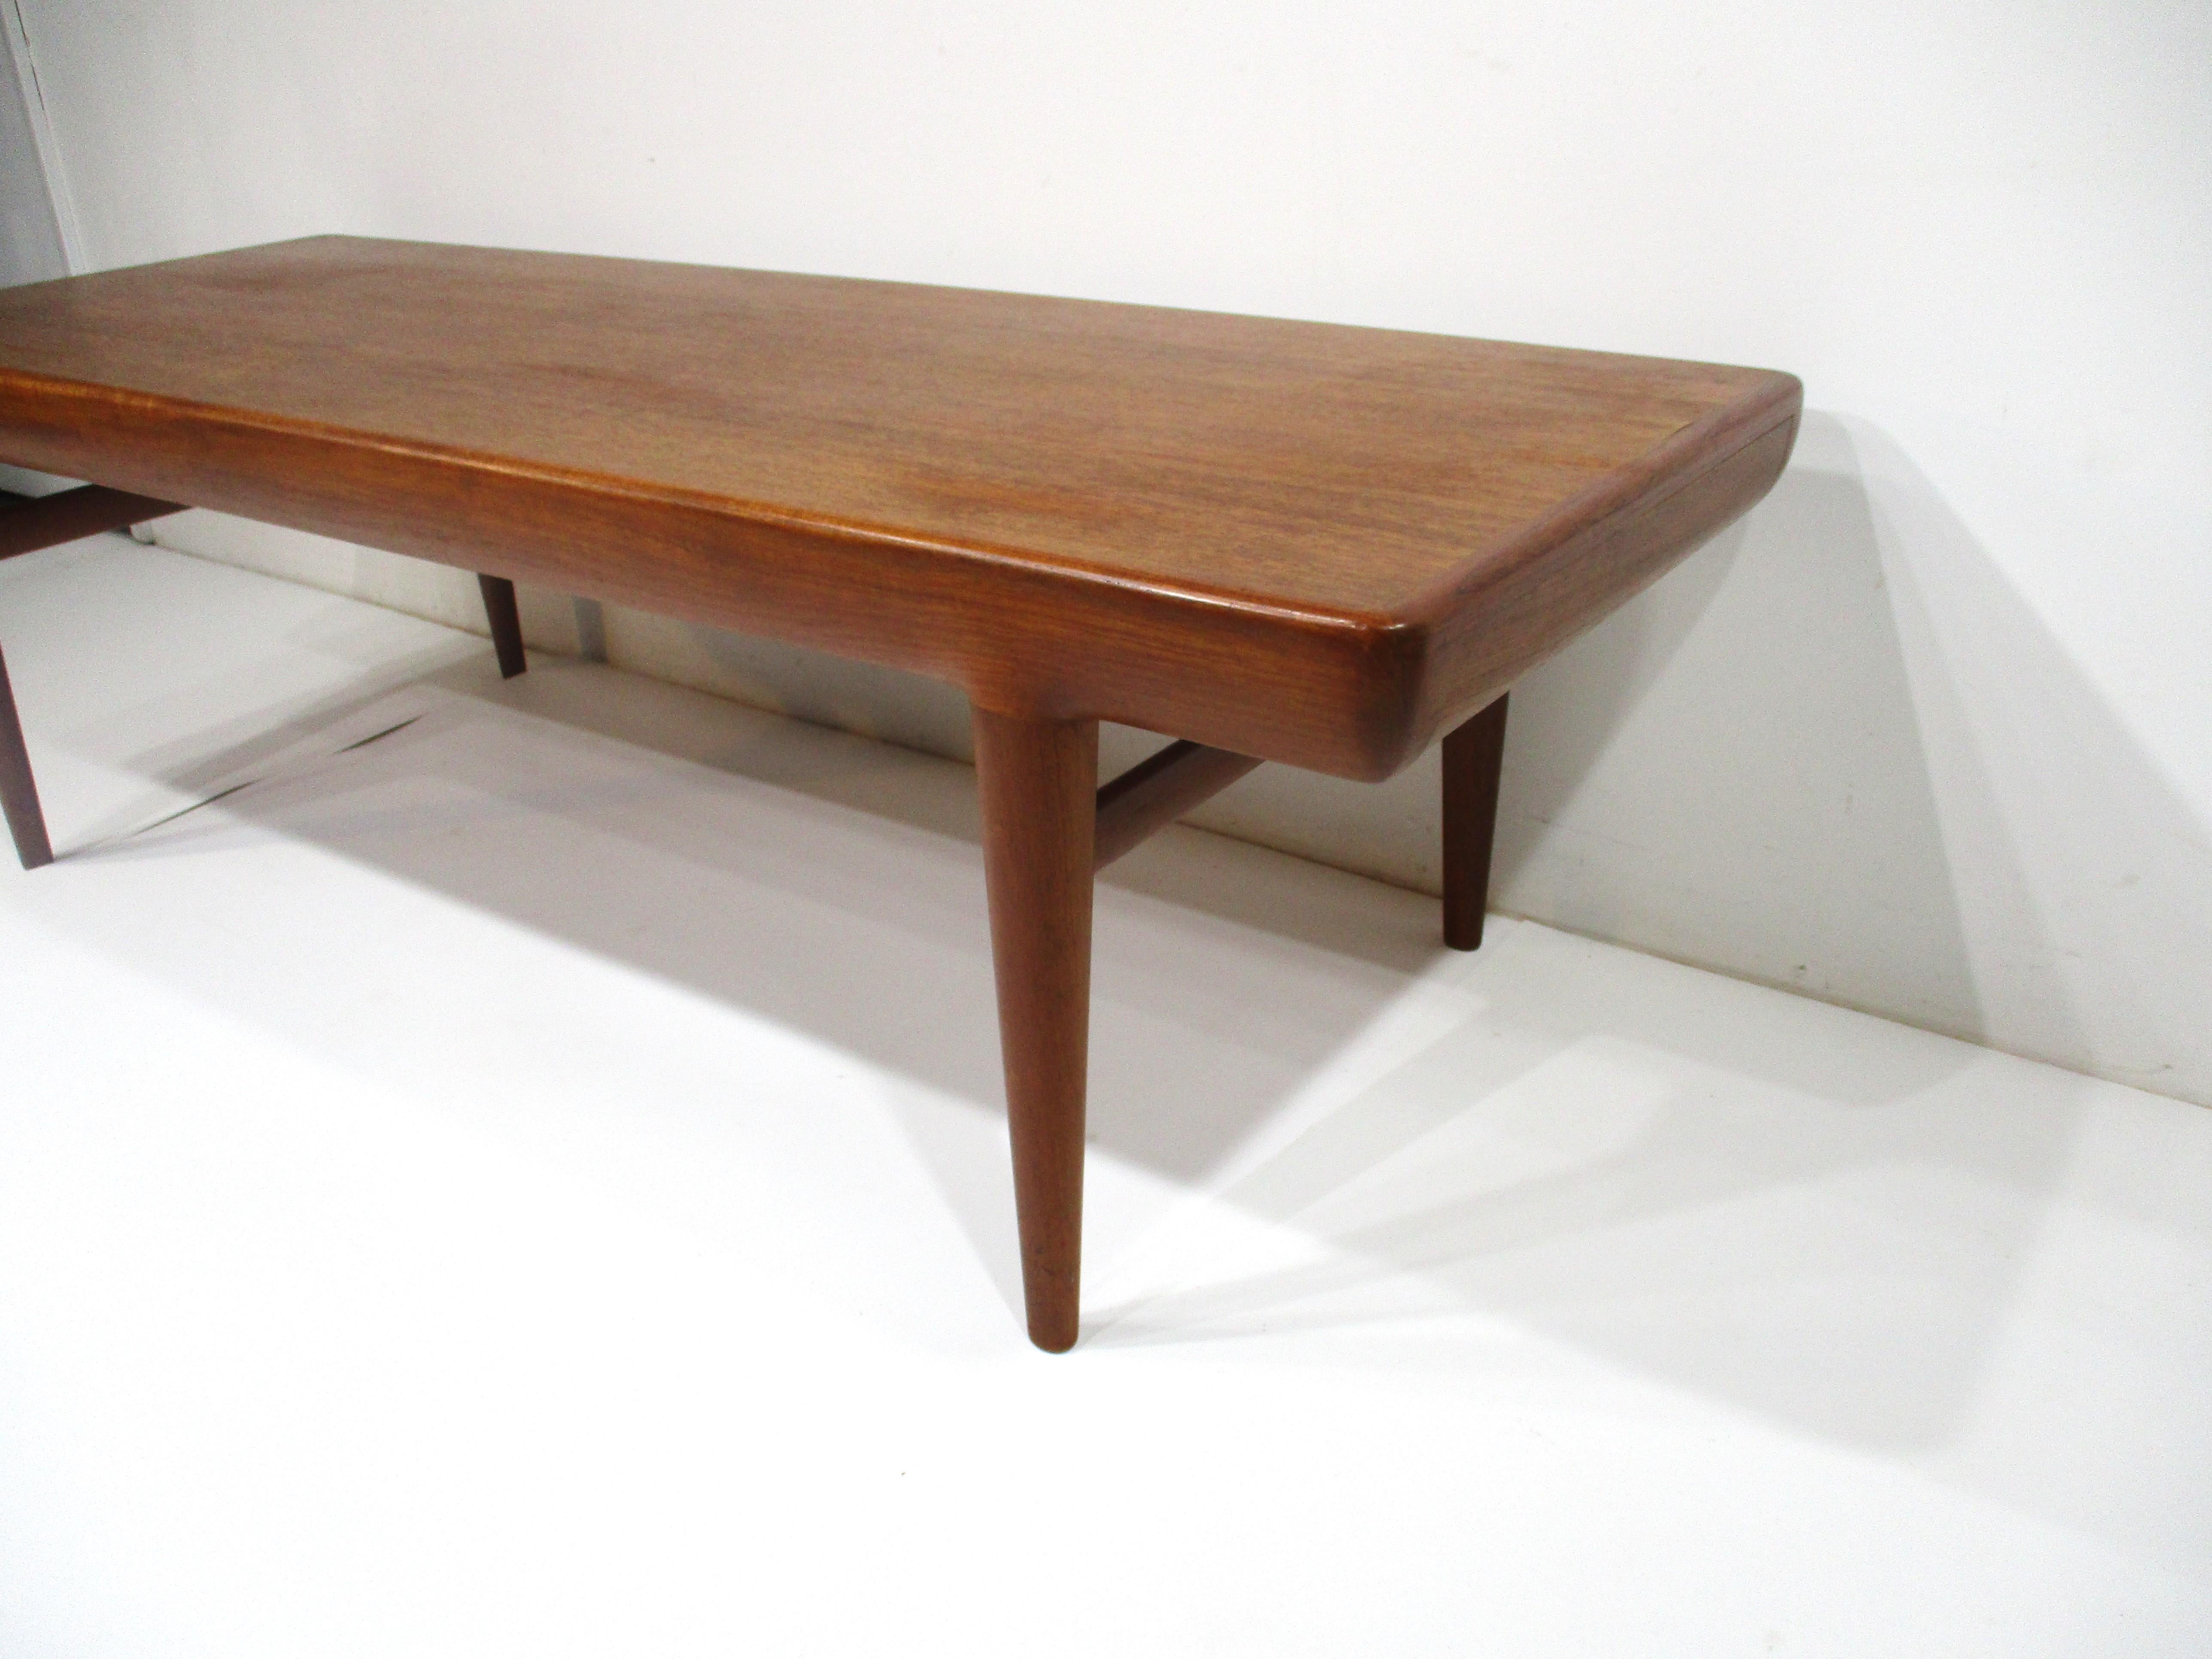 Teak Coffee Table w/ Pull Out Ends by Silkeborg -Johannes Andersen Denmark  1